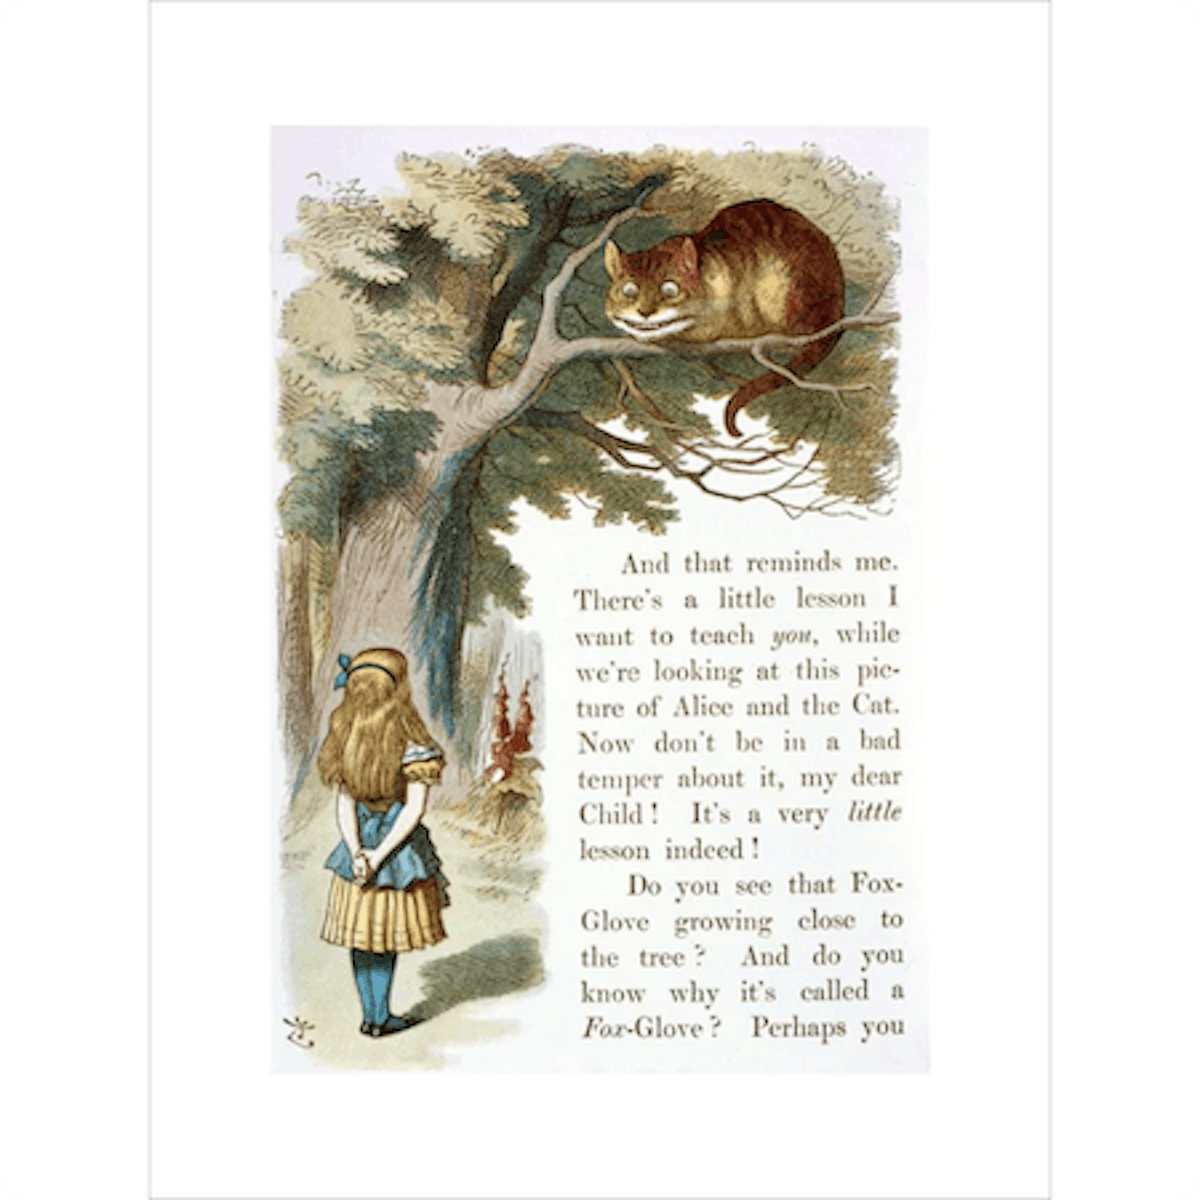 Alice and the Cheshire Cat print by John Tenniel, available from the British Library.